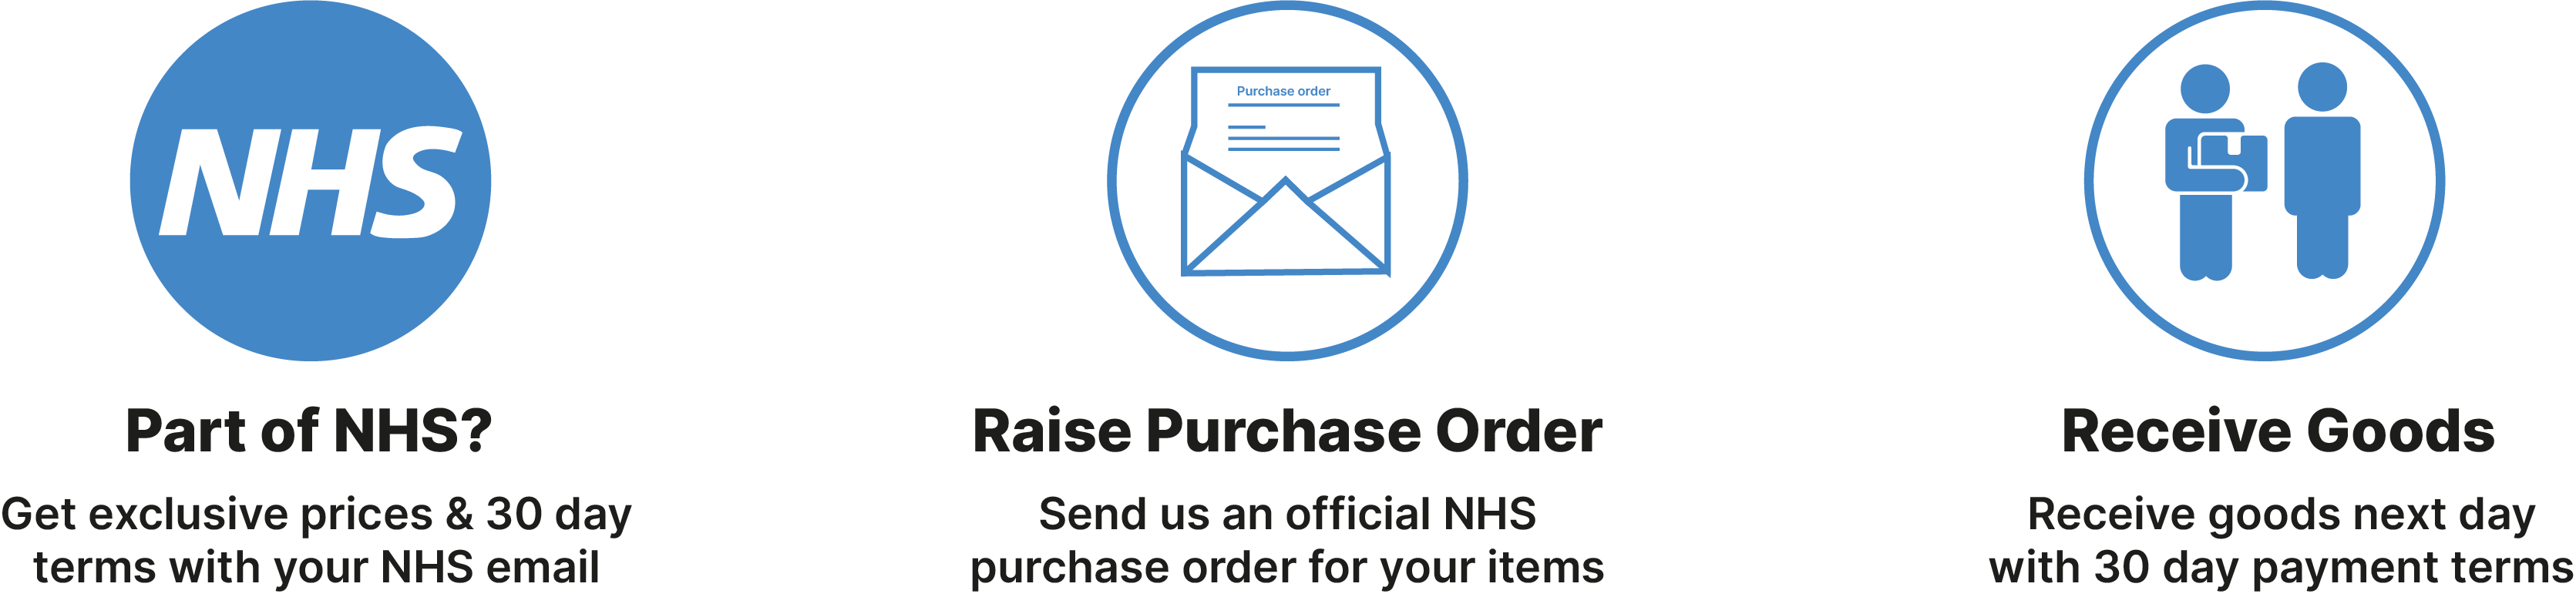 NHS discount ordering process